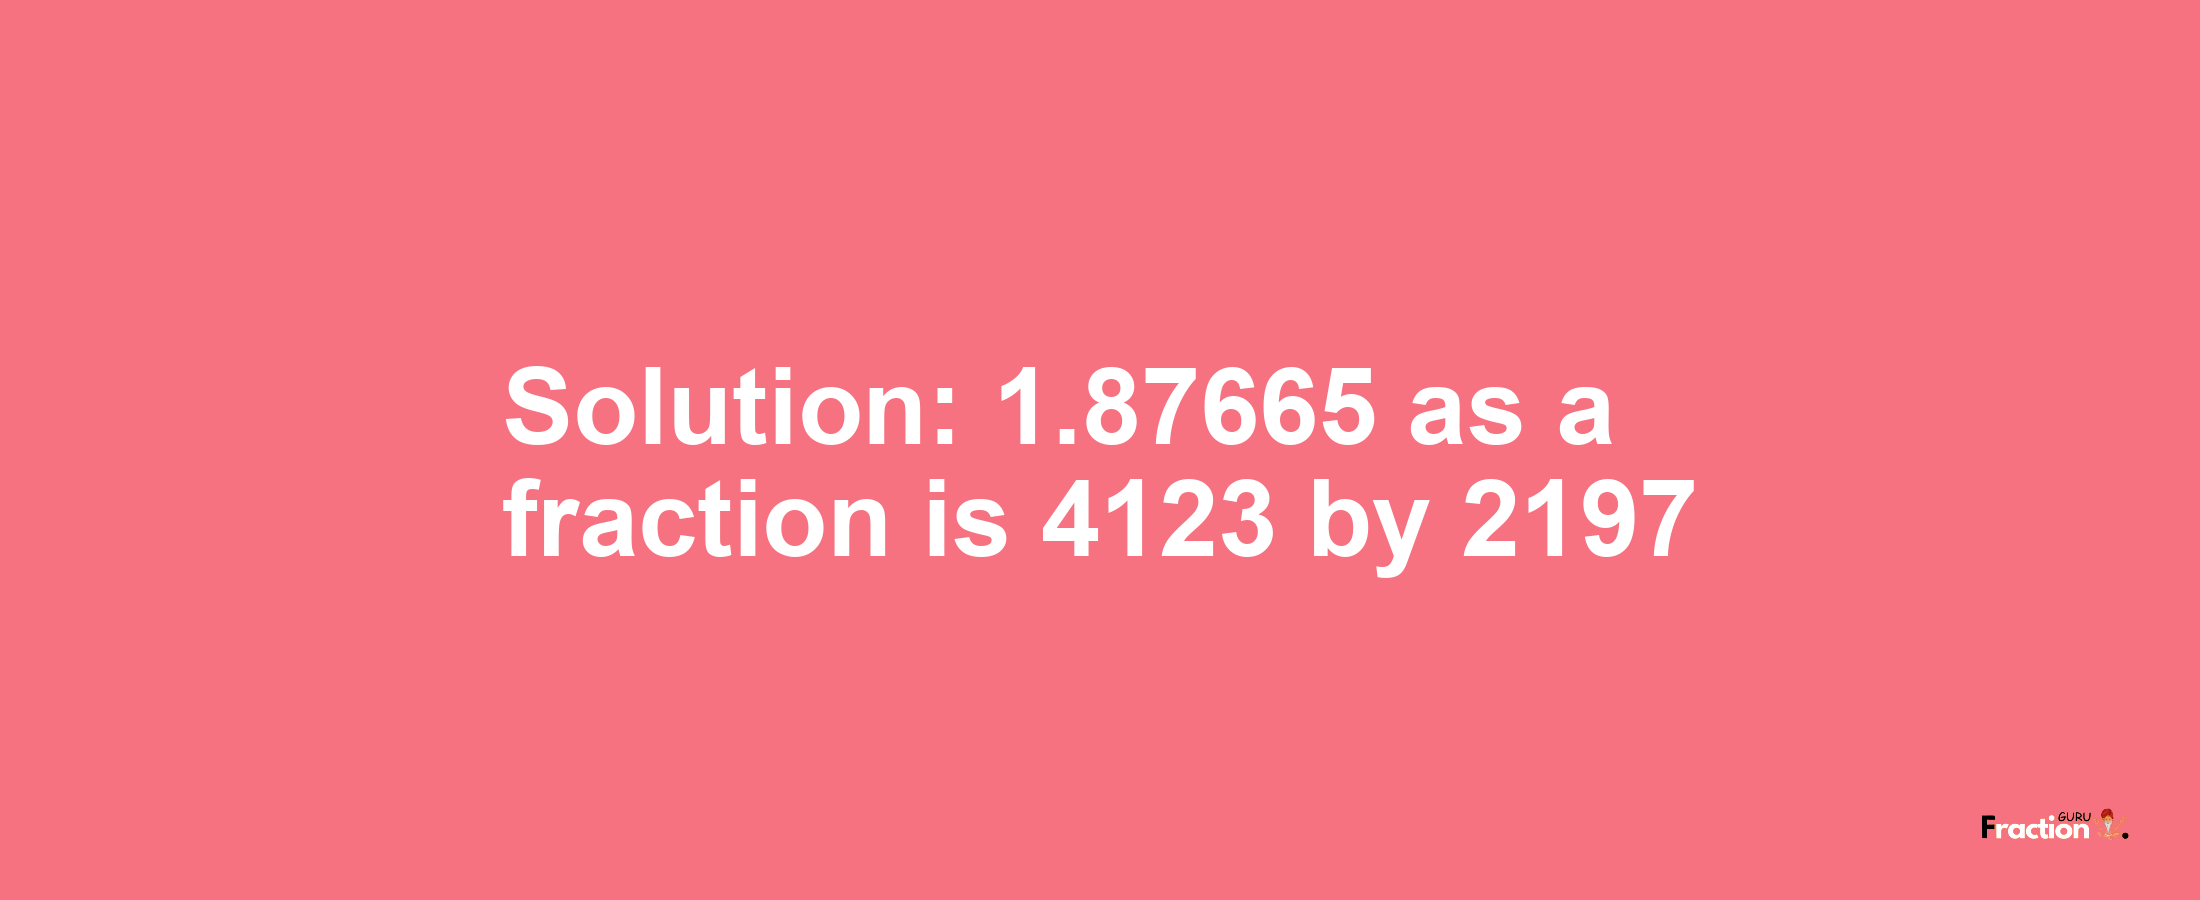 Solution:1.87665 as a fraction is 4123/2197